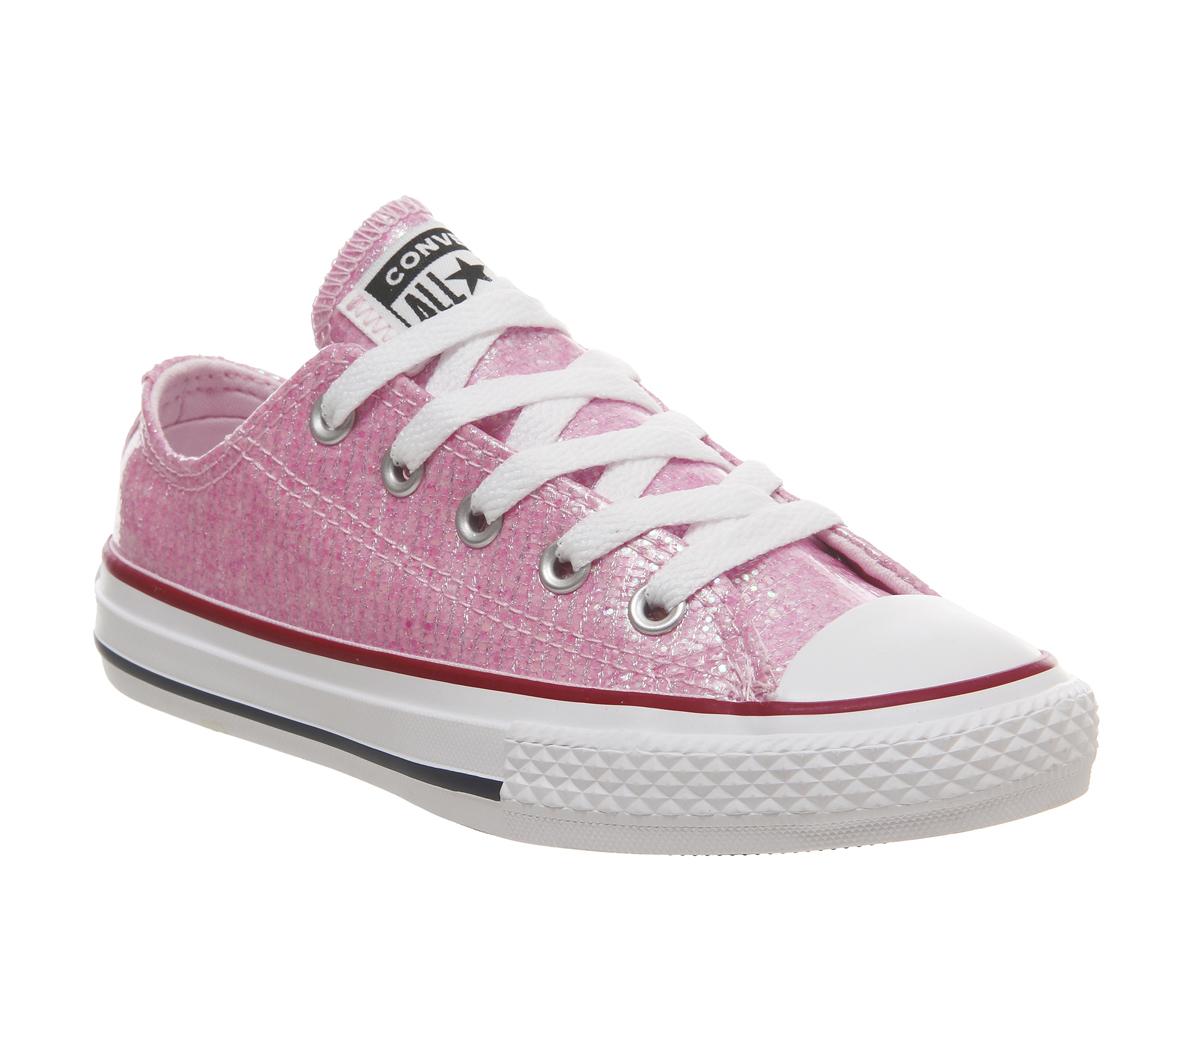 ConverseAll Star Low Youth TrainersPink Foam Glitter White